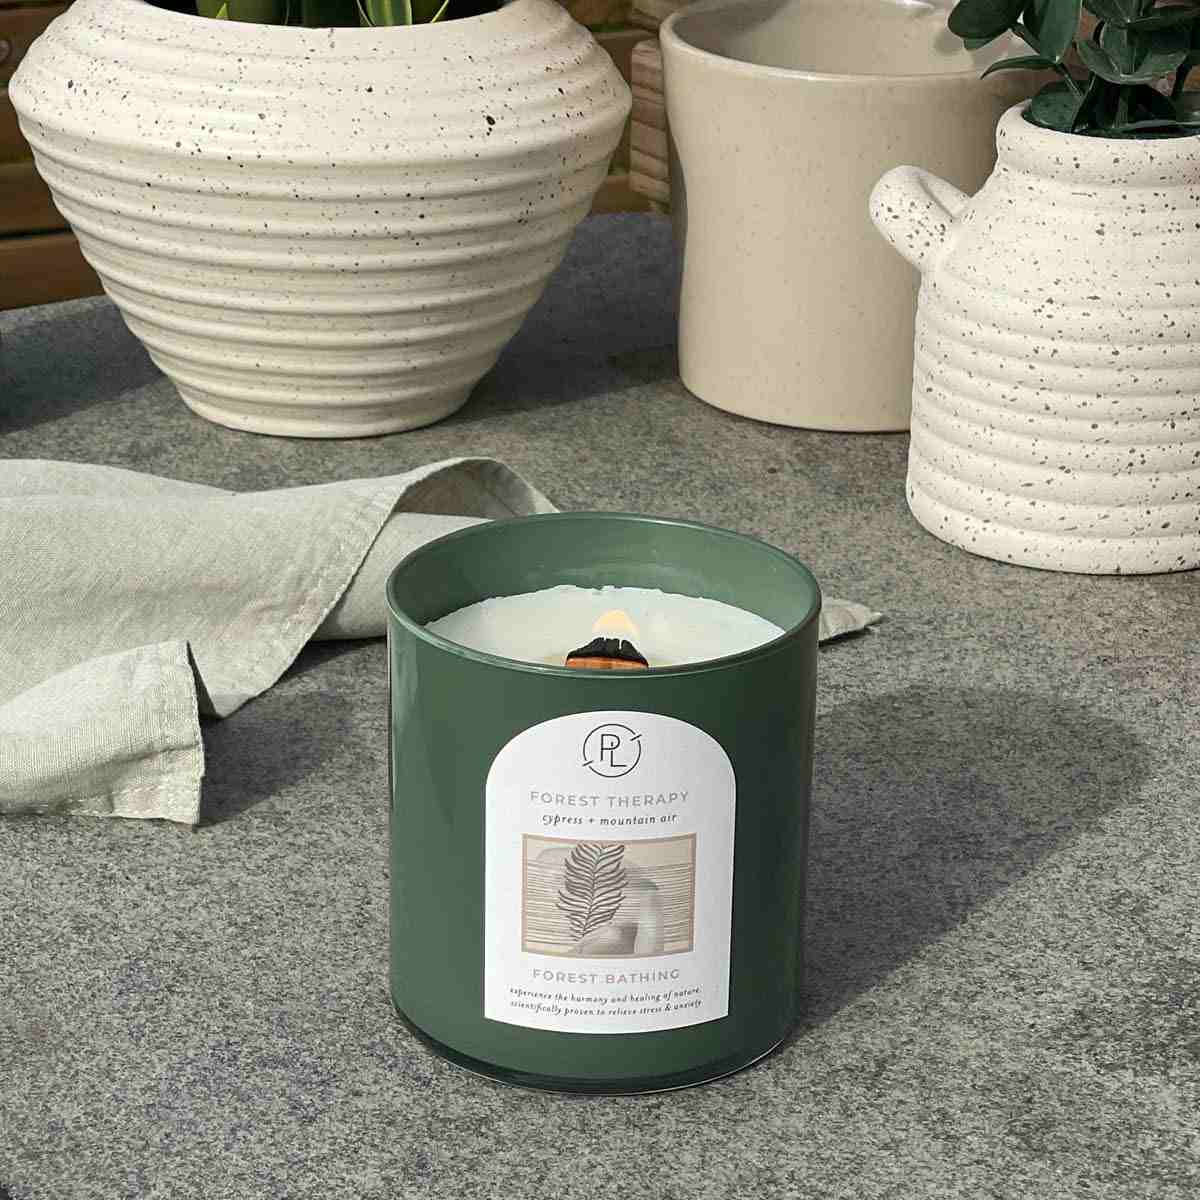 Forest Therapy: cypress + mountain air Jar Candle - PartyLite US